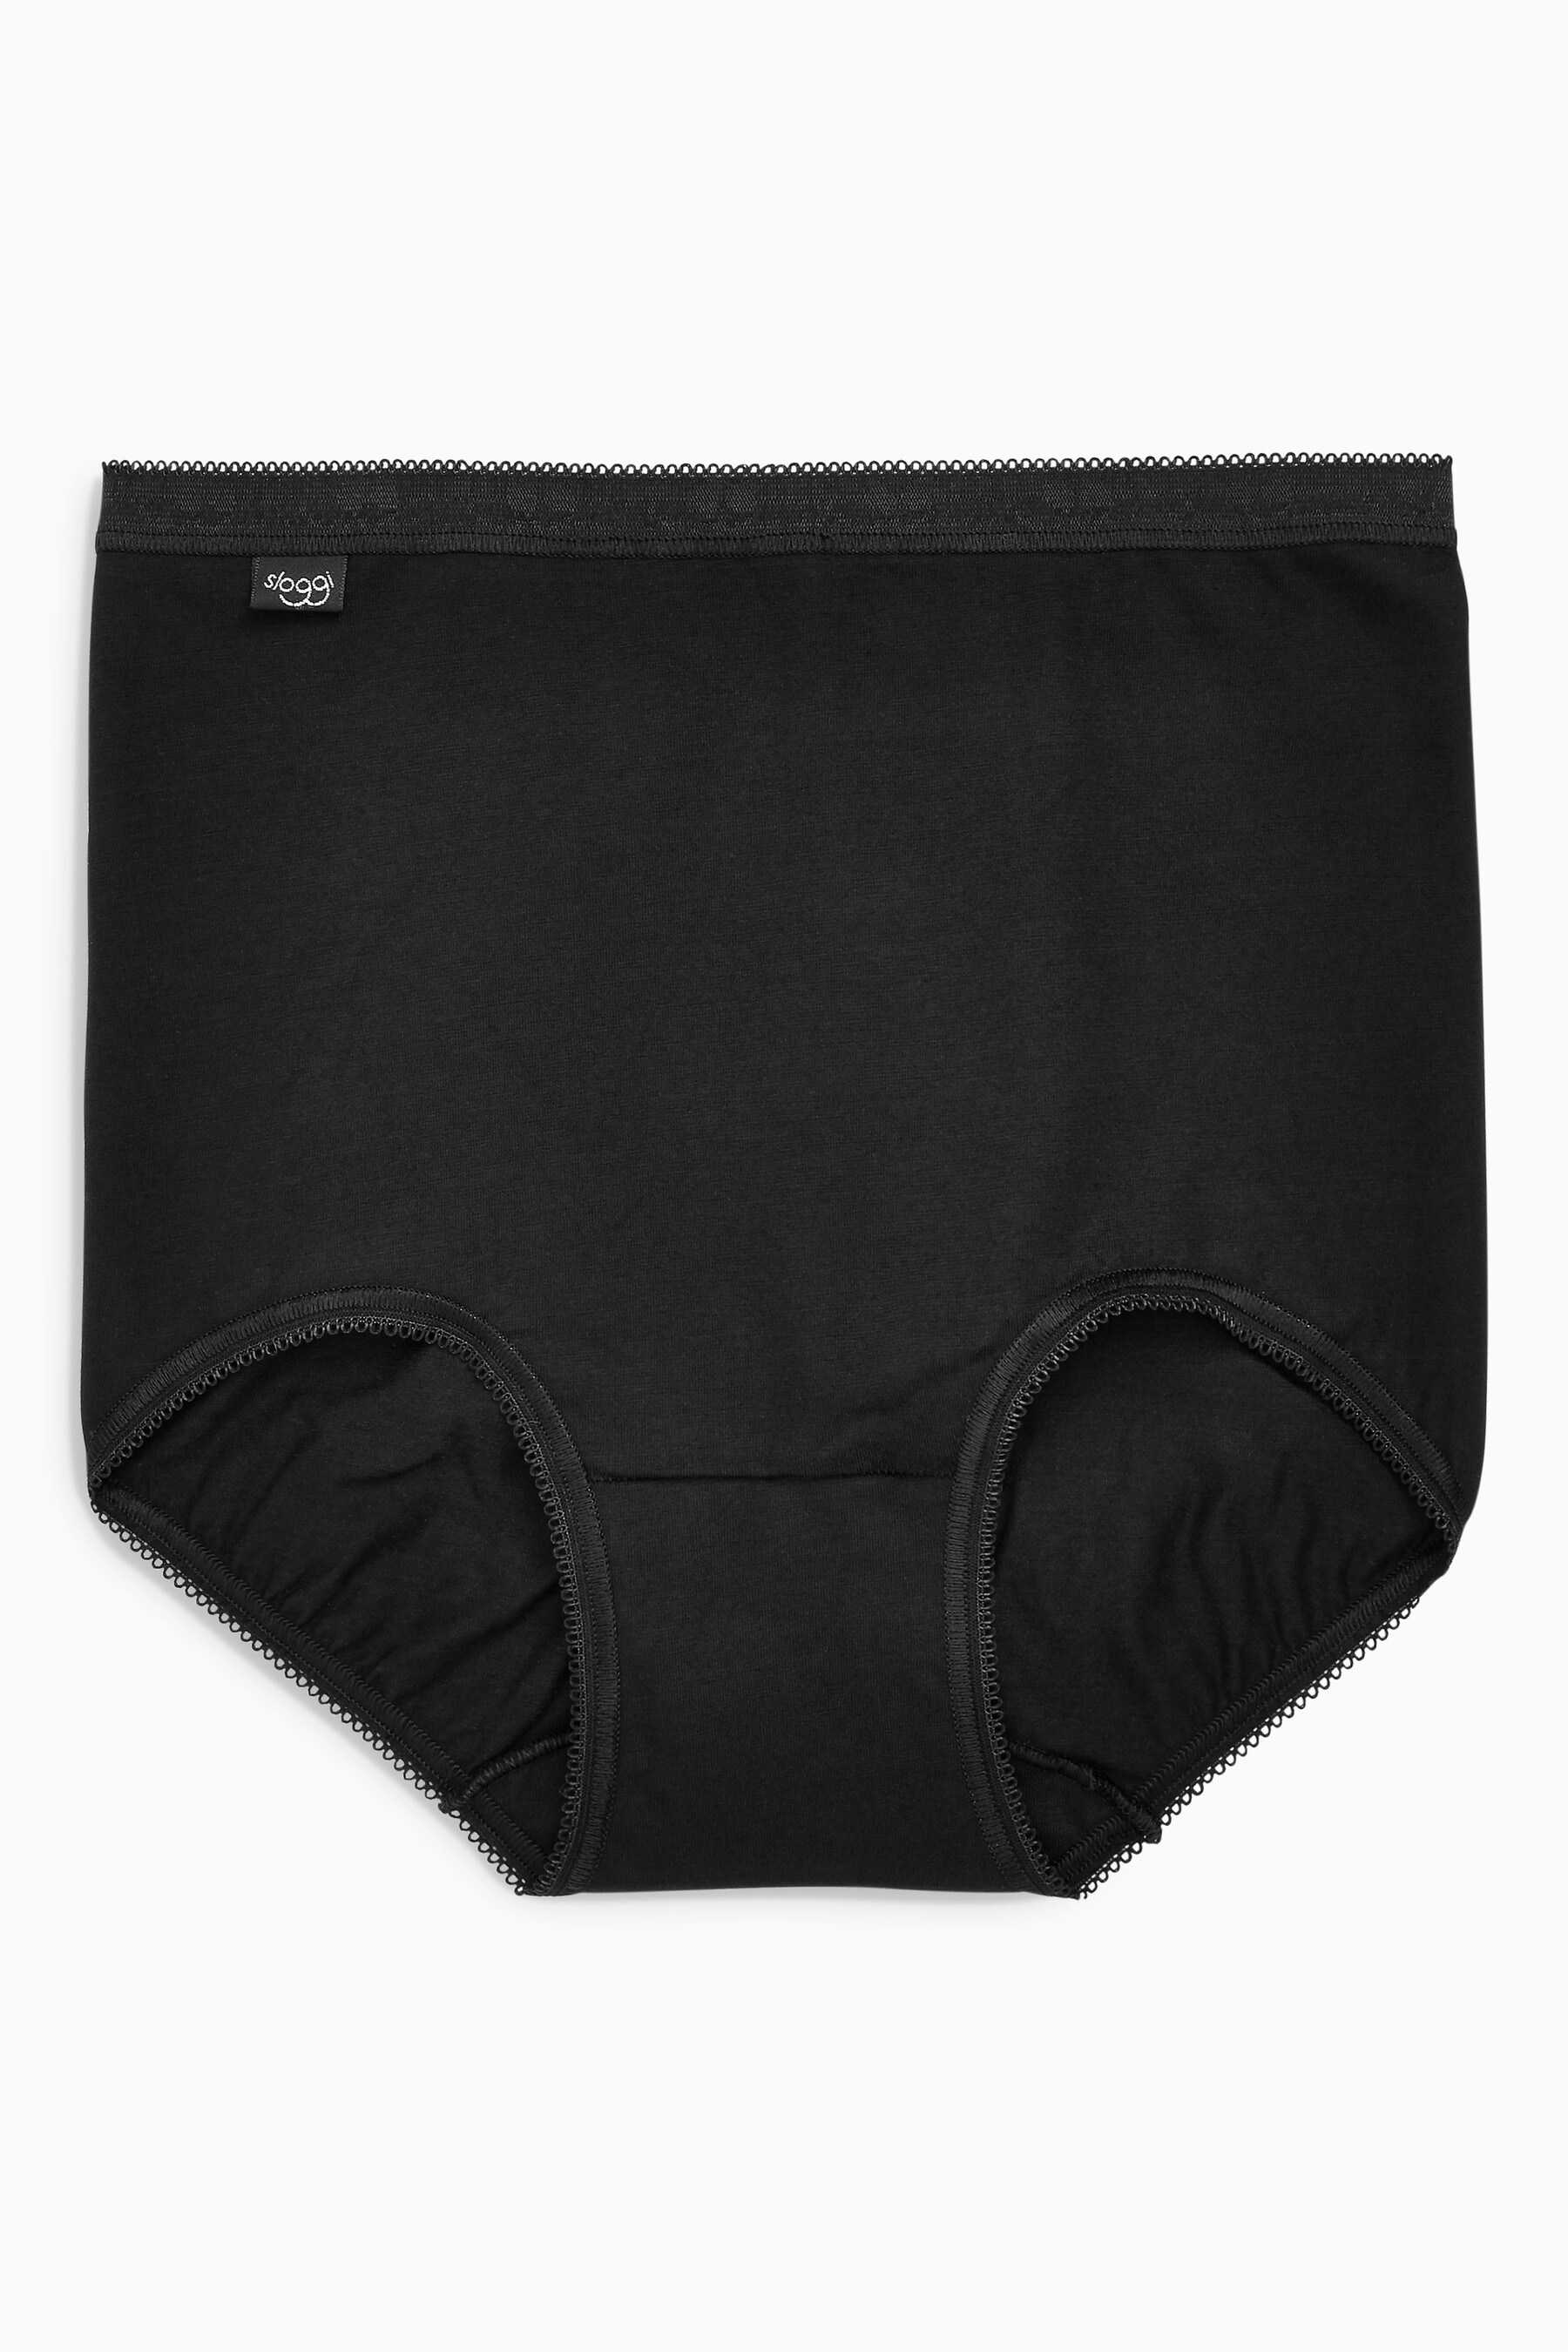 Buy Sloggi Basic+ Maxi Brief Three Pack from the Next UK online shop